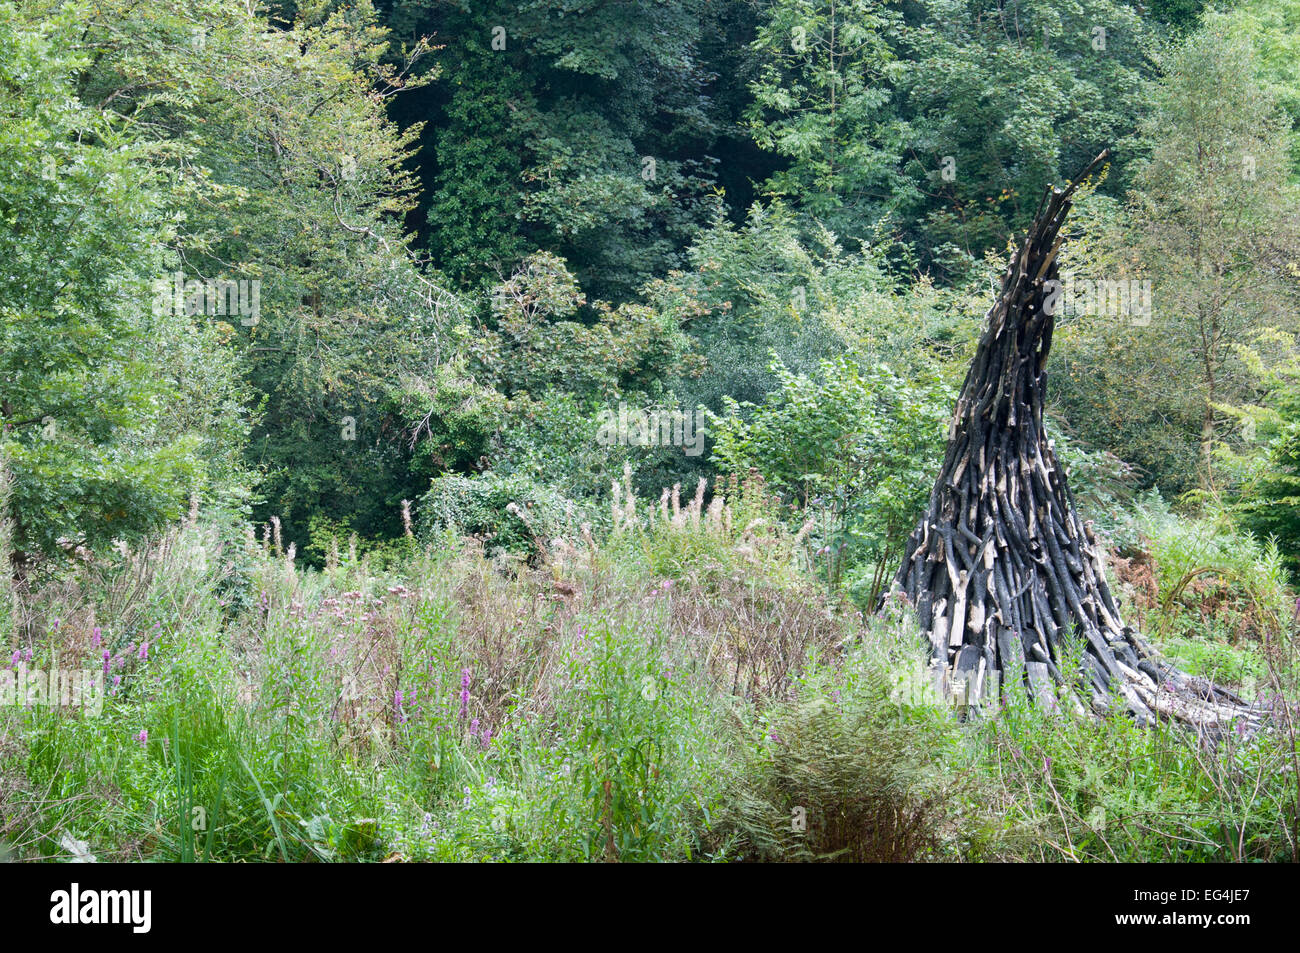 Wooden art installation in The Lost Gardens of Heligan, Cornwall, England Stock Photo